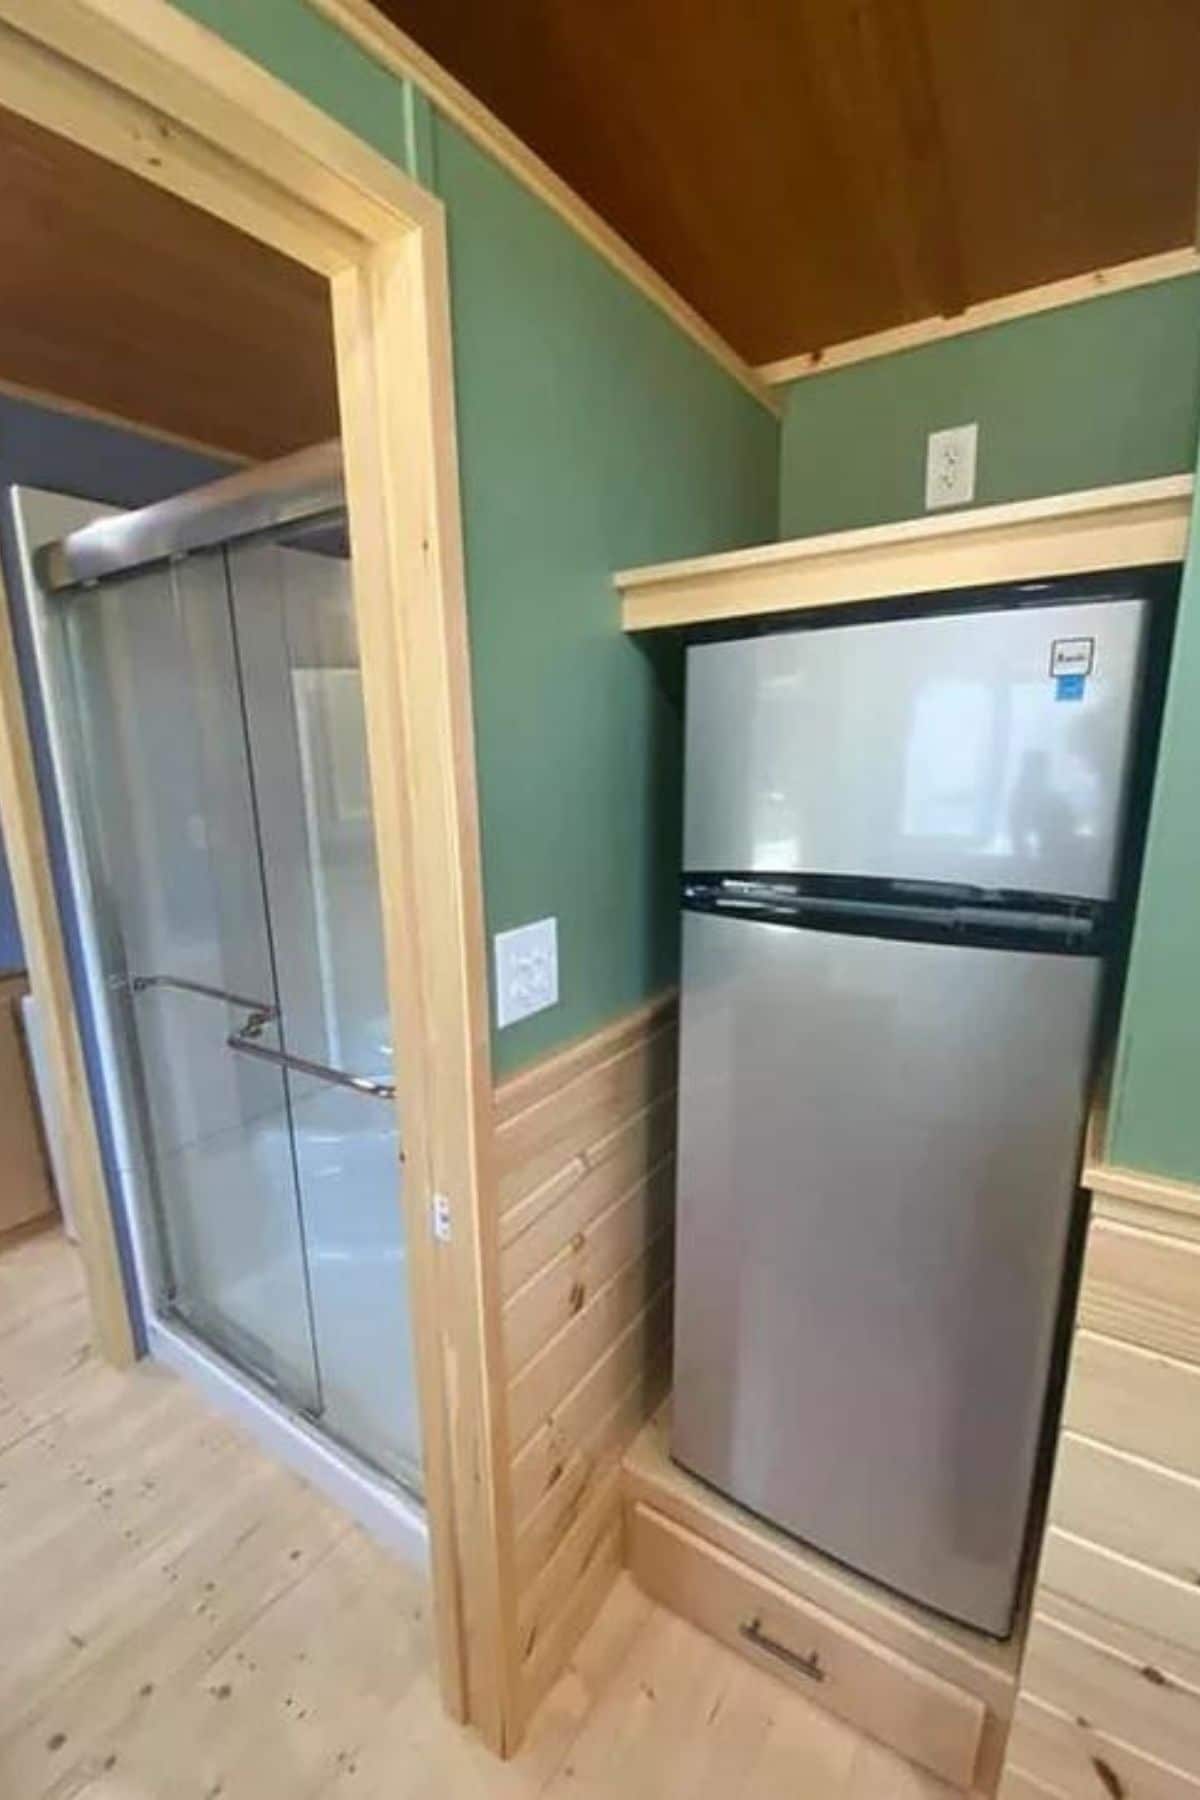 Stainless steel refrigerator under cabinet next to wall by bathroom